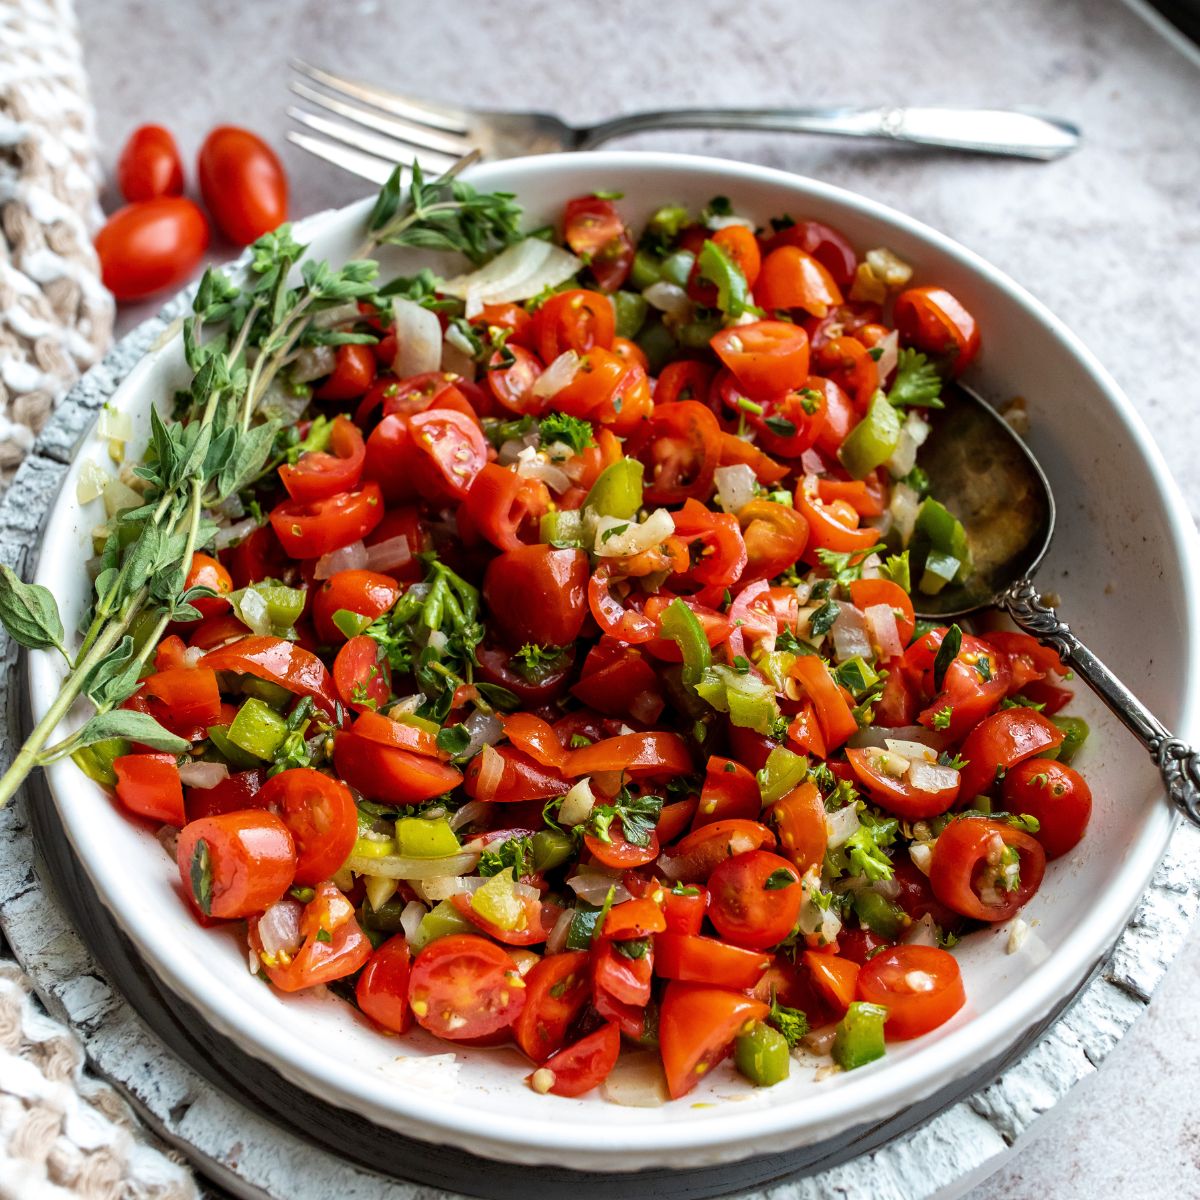 Tomato Relish in a large serving bowl with a silver serving spoon.